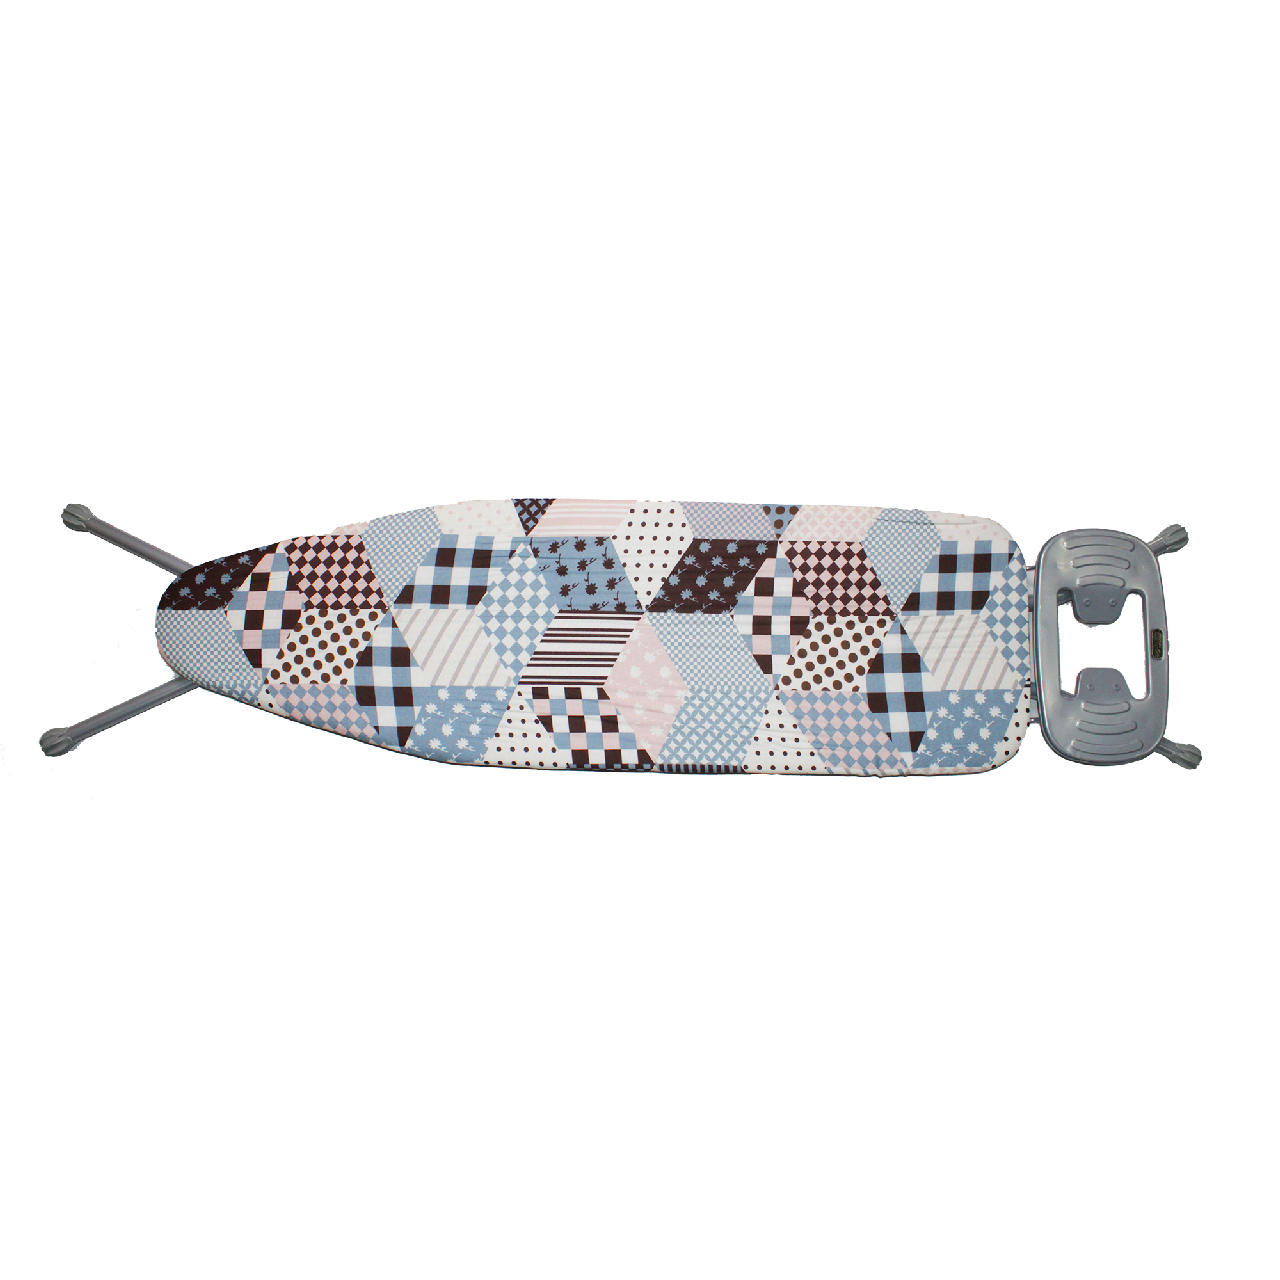 110x33cm Mesh Ironing Board with Safety Iron Rest - Pattern